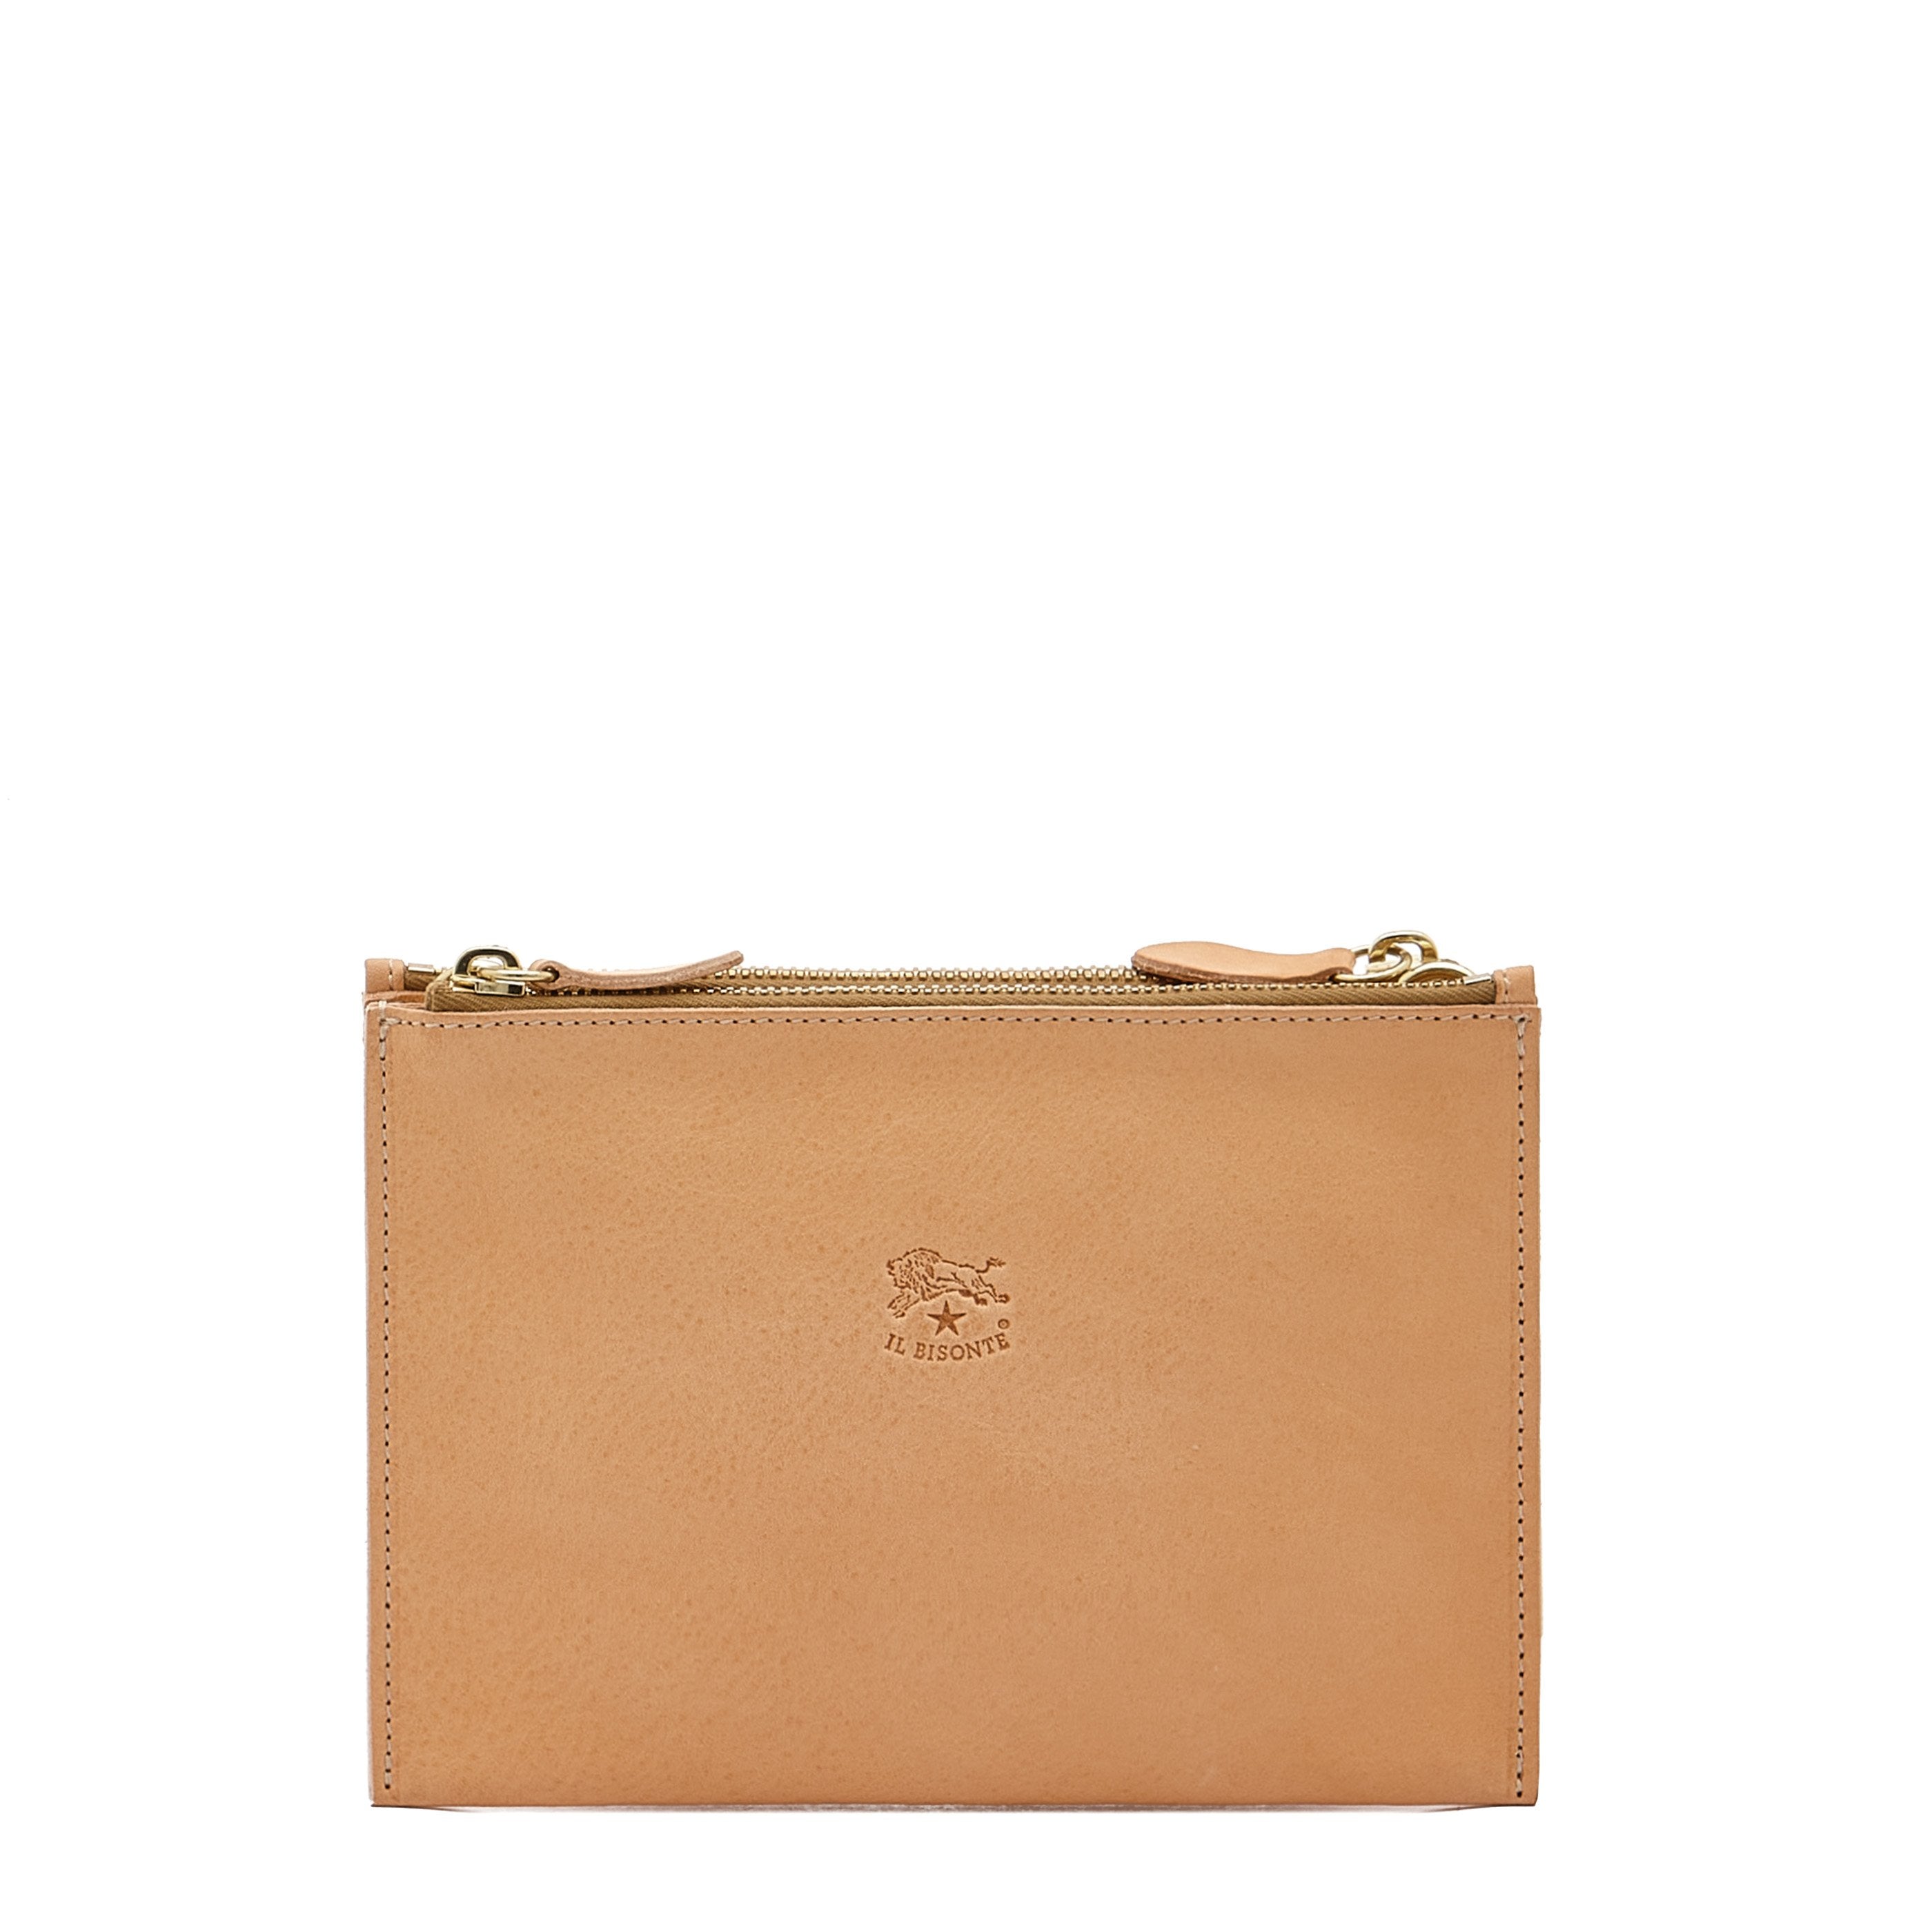 Talamone | Women's clutch bag in leather color natural